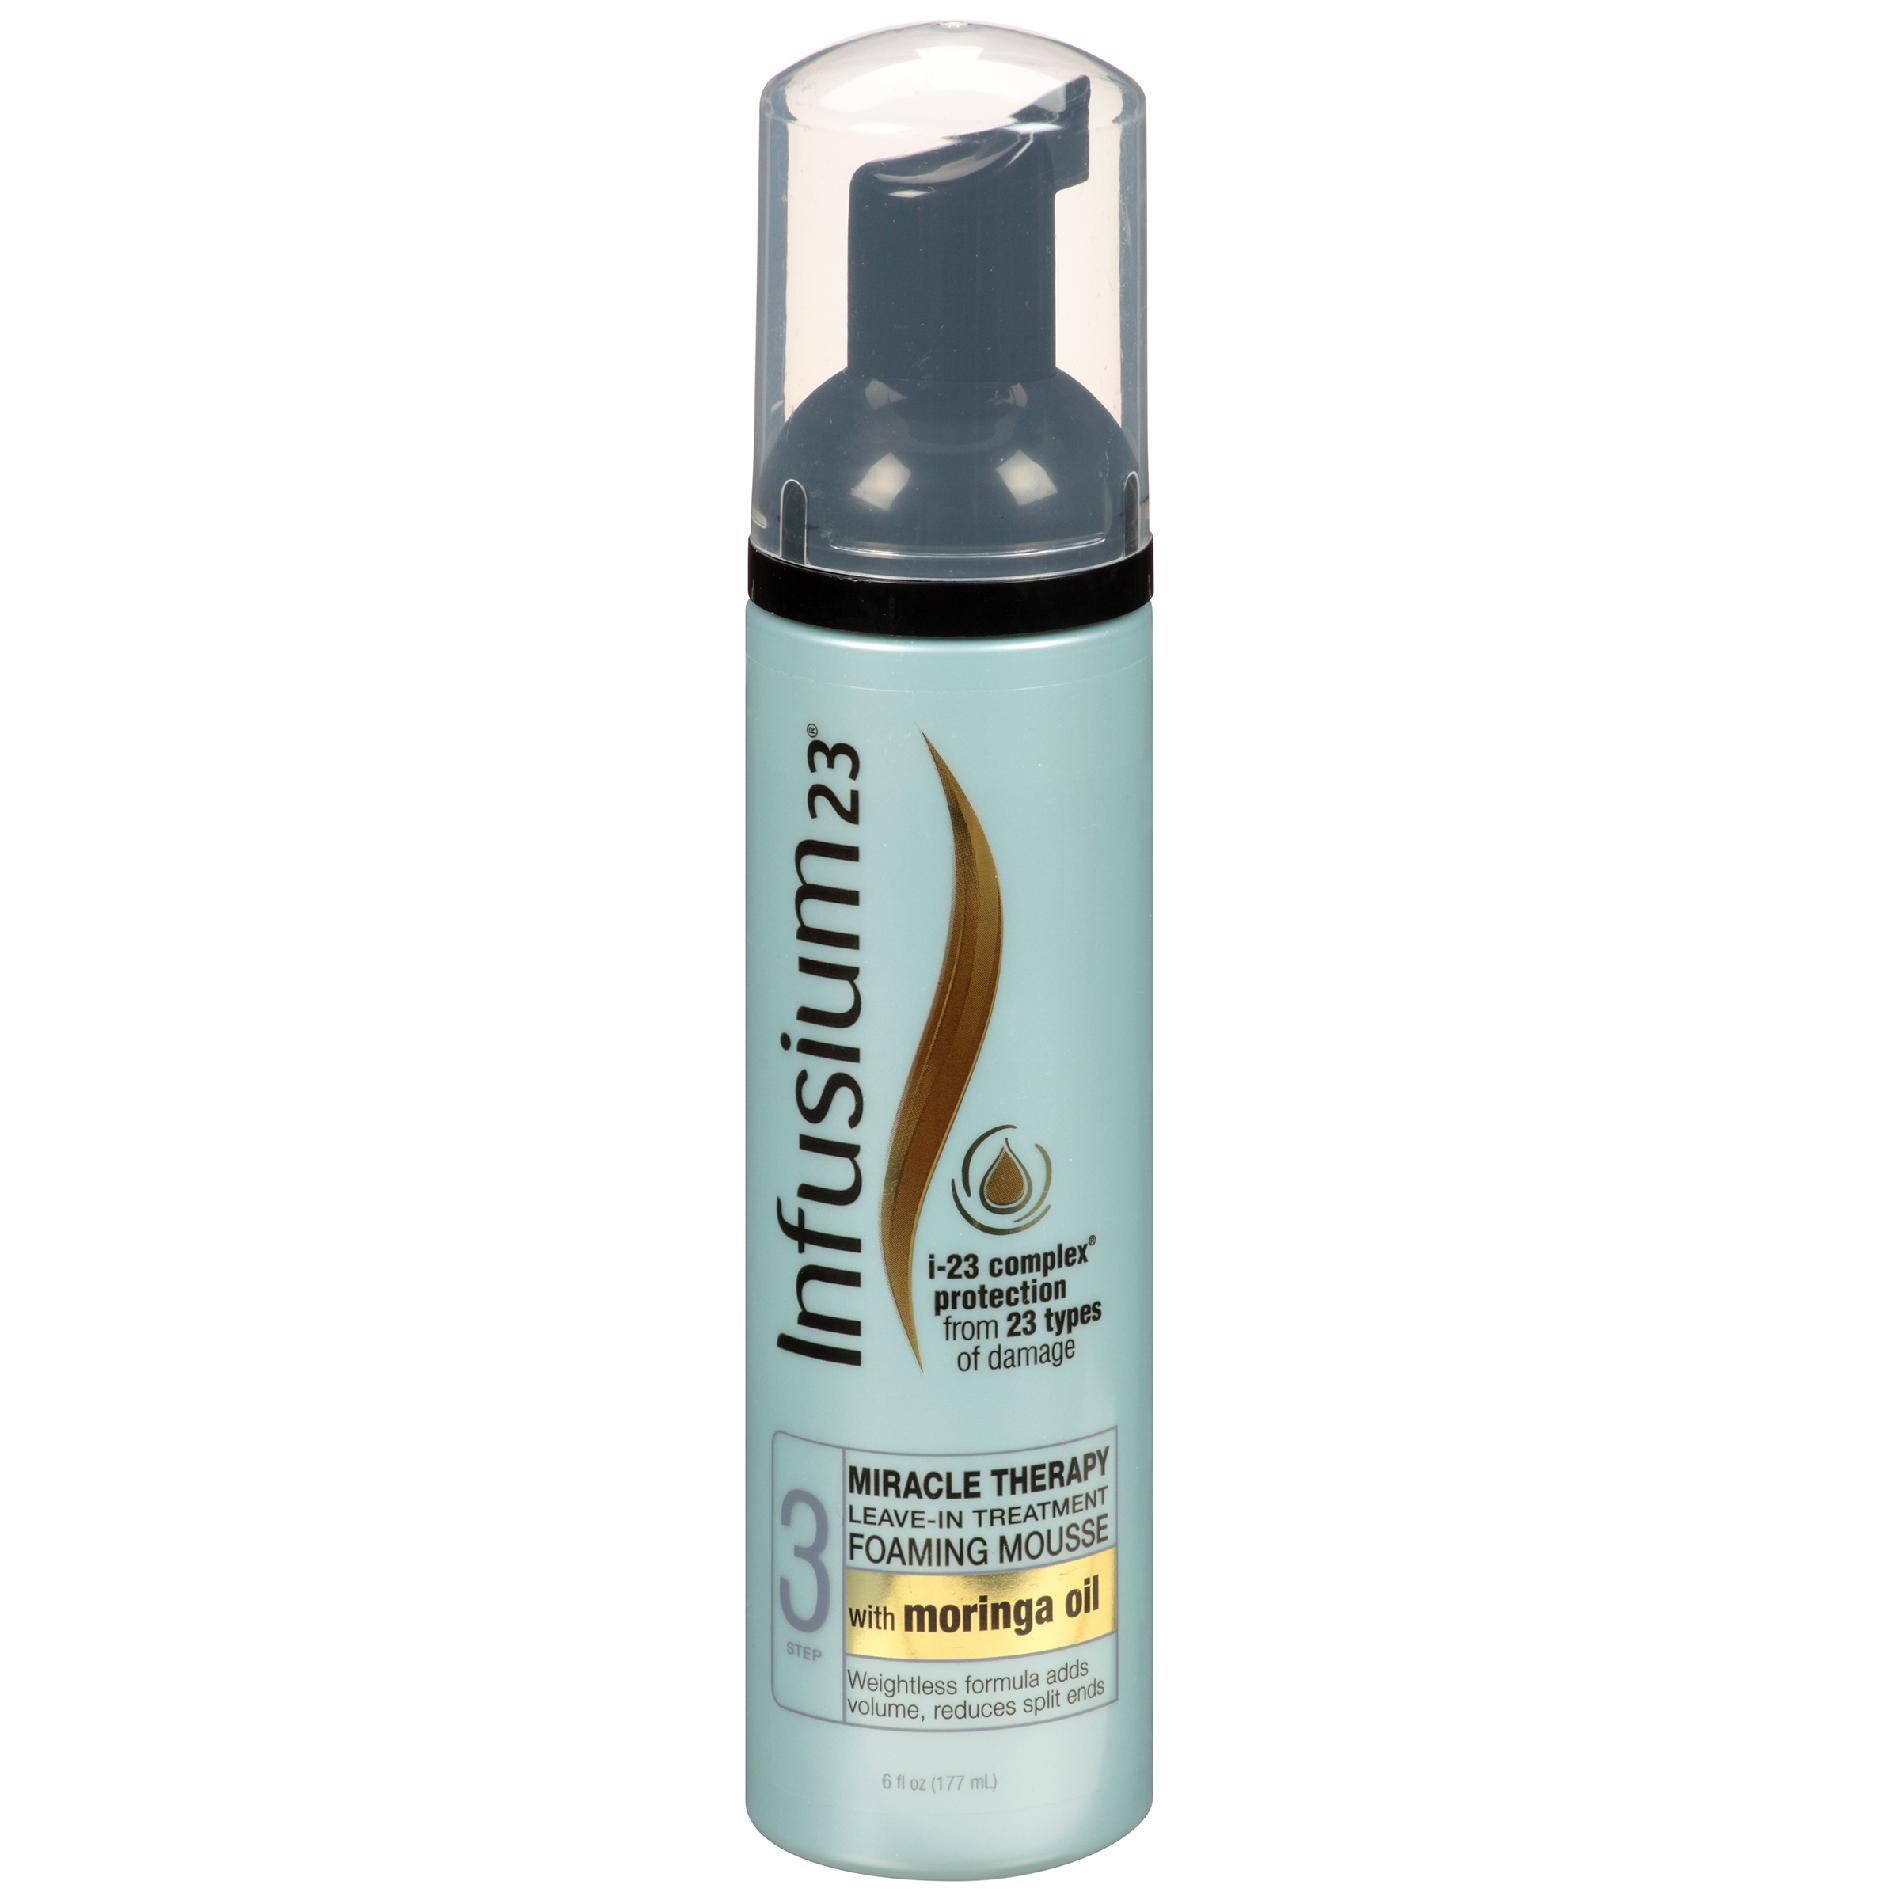 UPC 827755003137 product image for Infusium Leave-In Treatment Miracle Therapy Foaming Mousse | upcitemdb.com